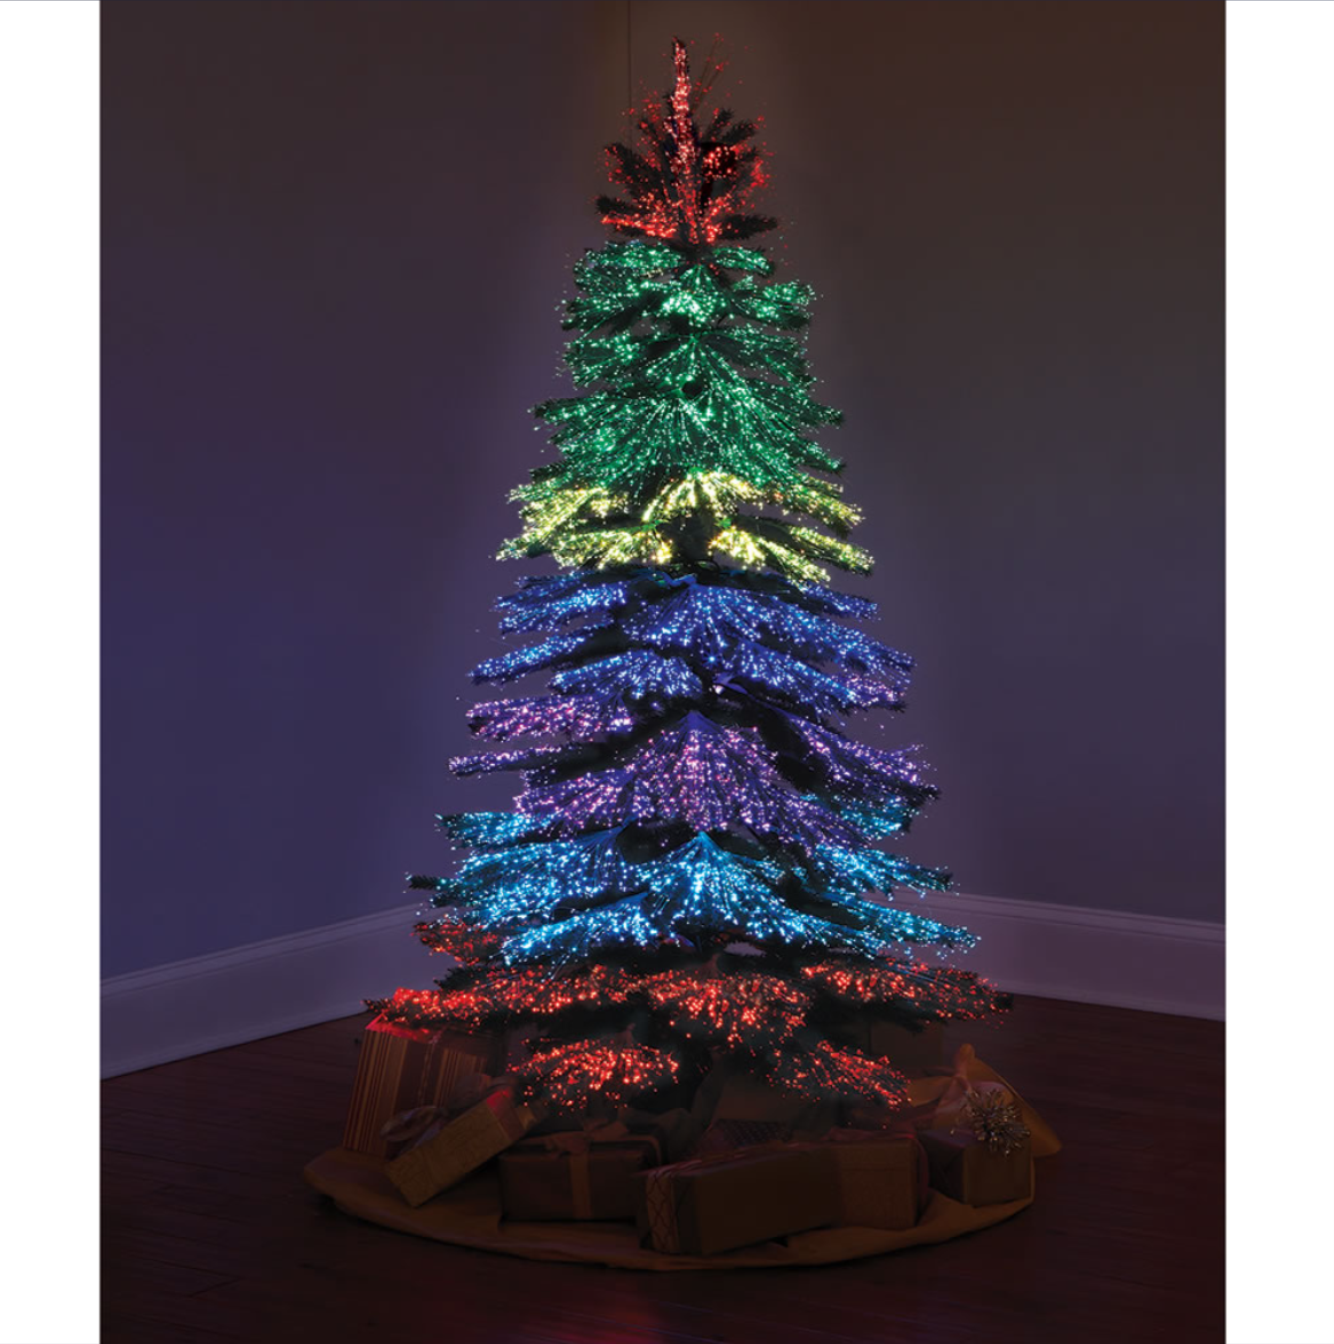 Thousand Points of Light Tree